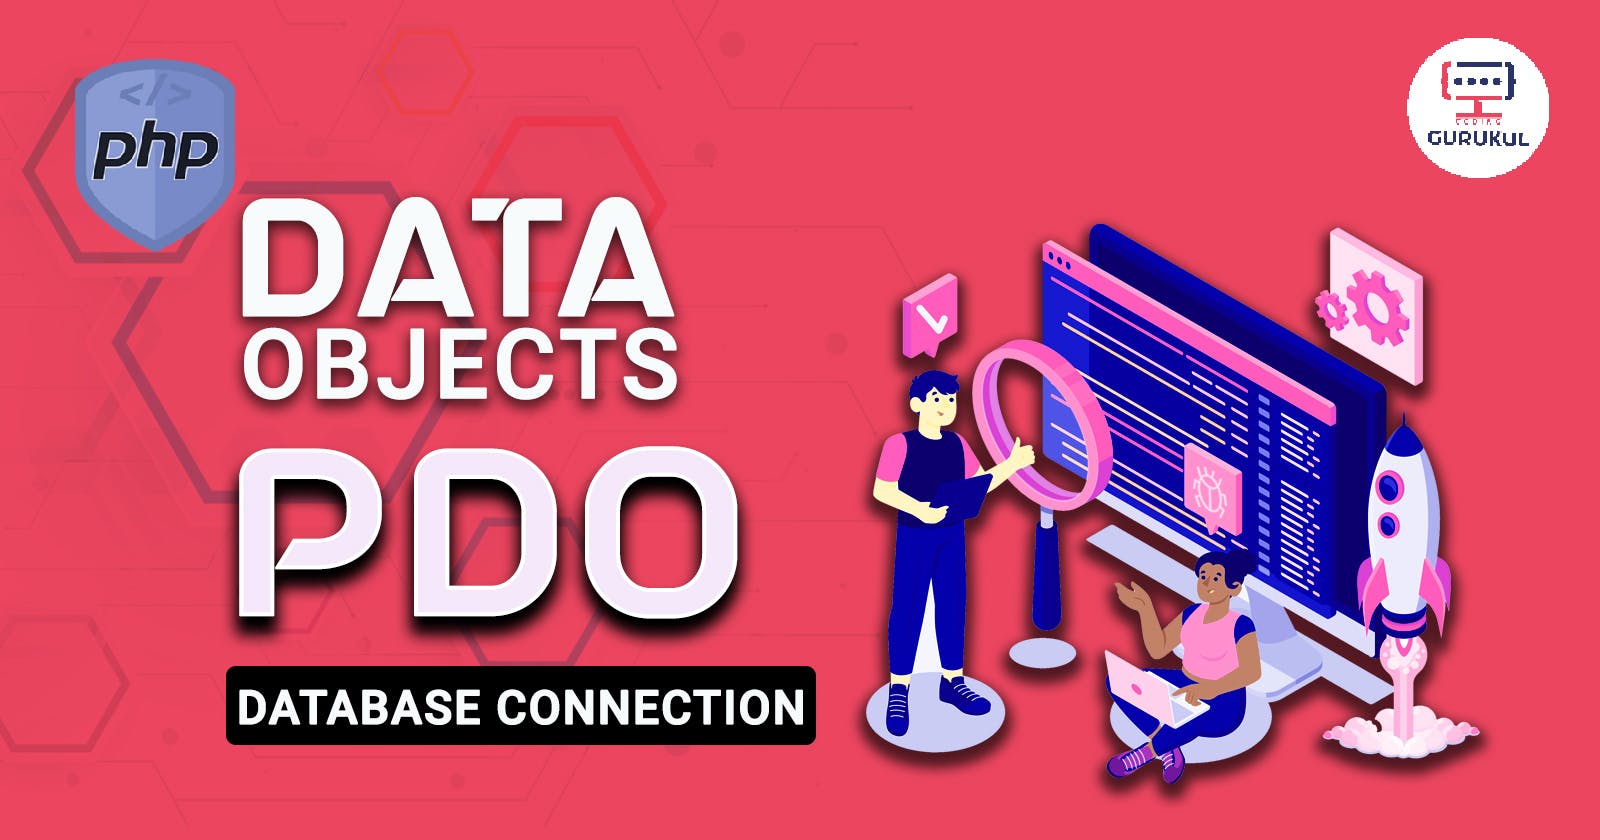 What is PHP Data Objects (PDO)